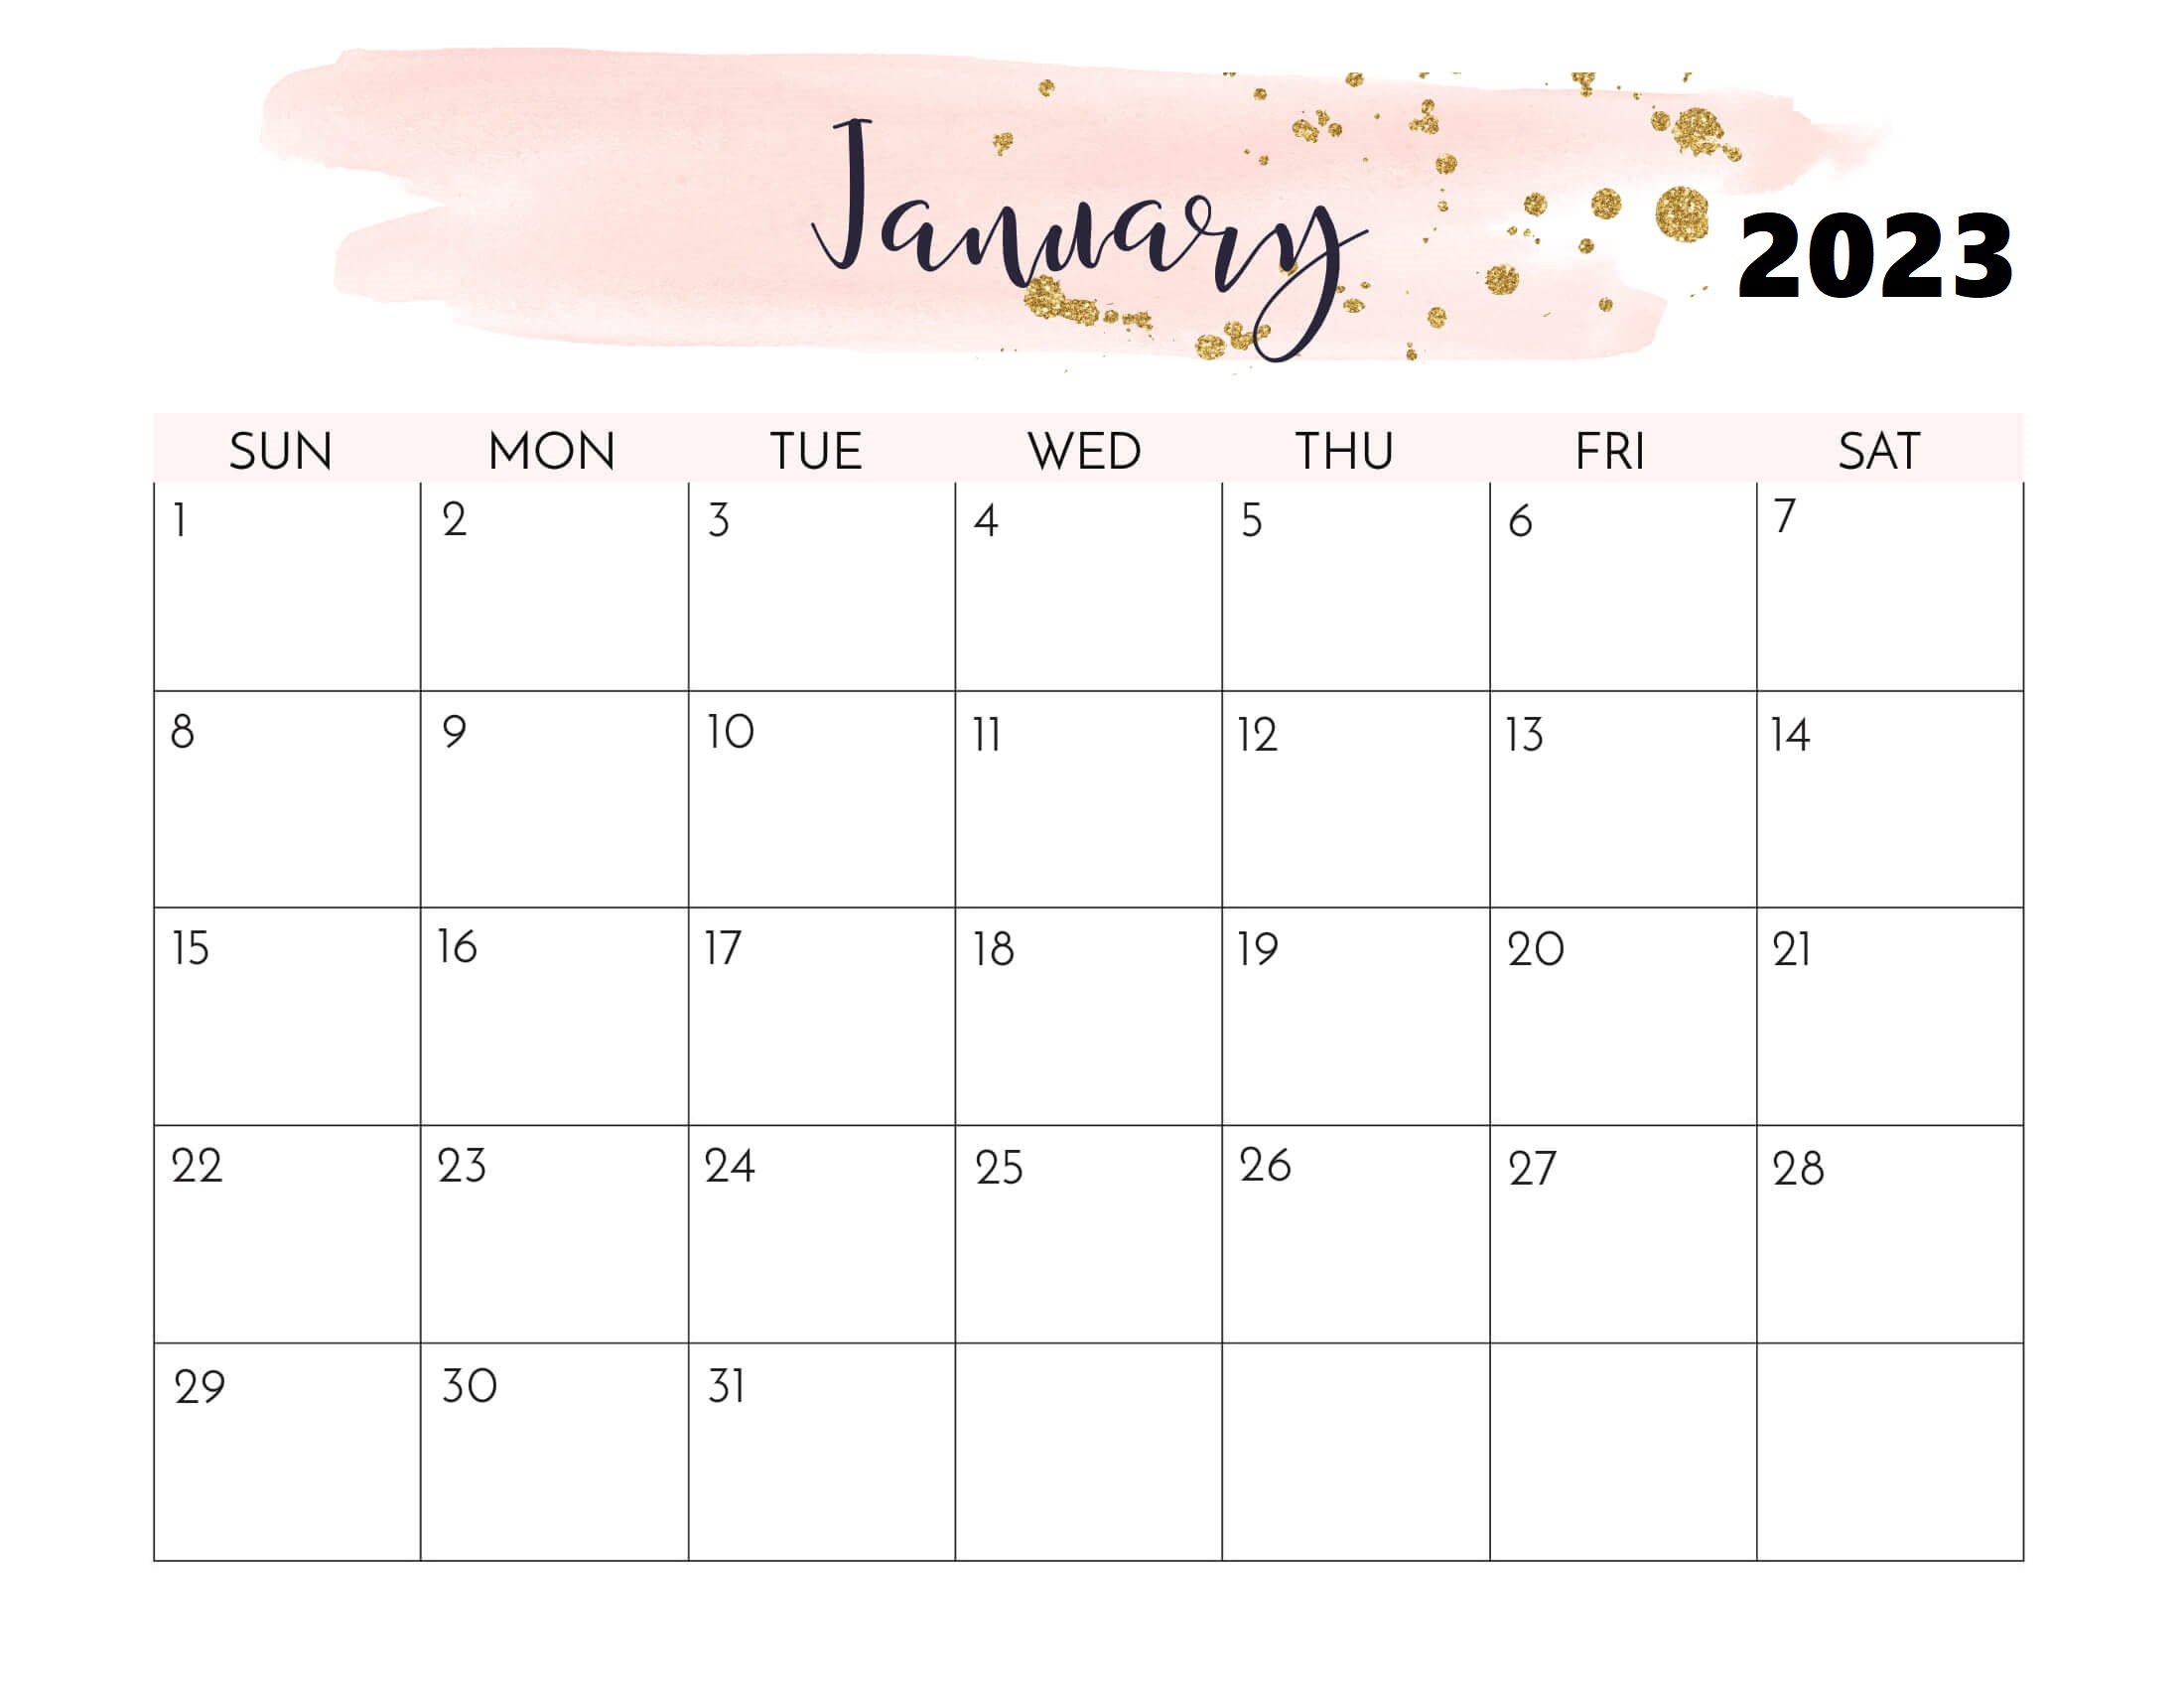 Here’s The Cute January 2023 Calendar I Could Find